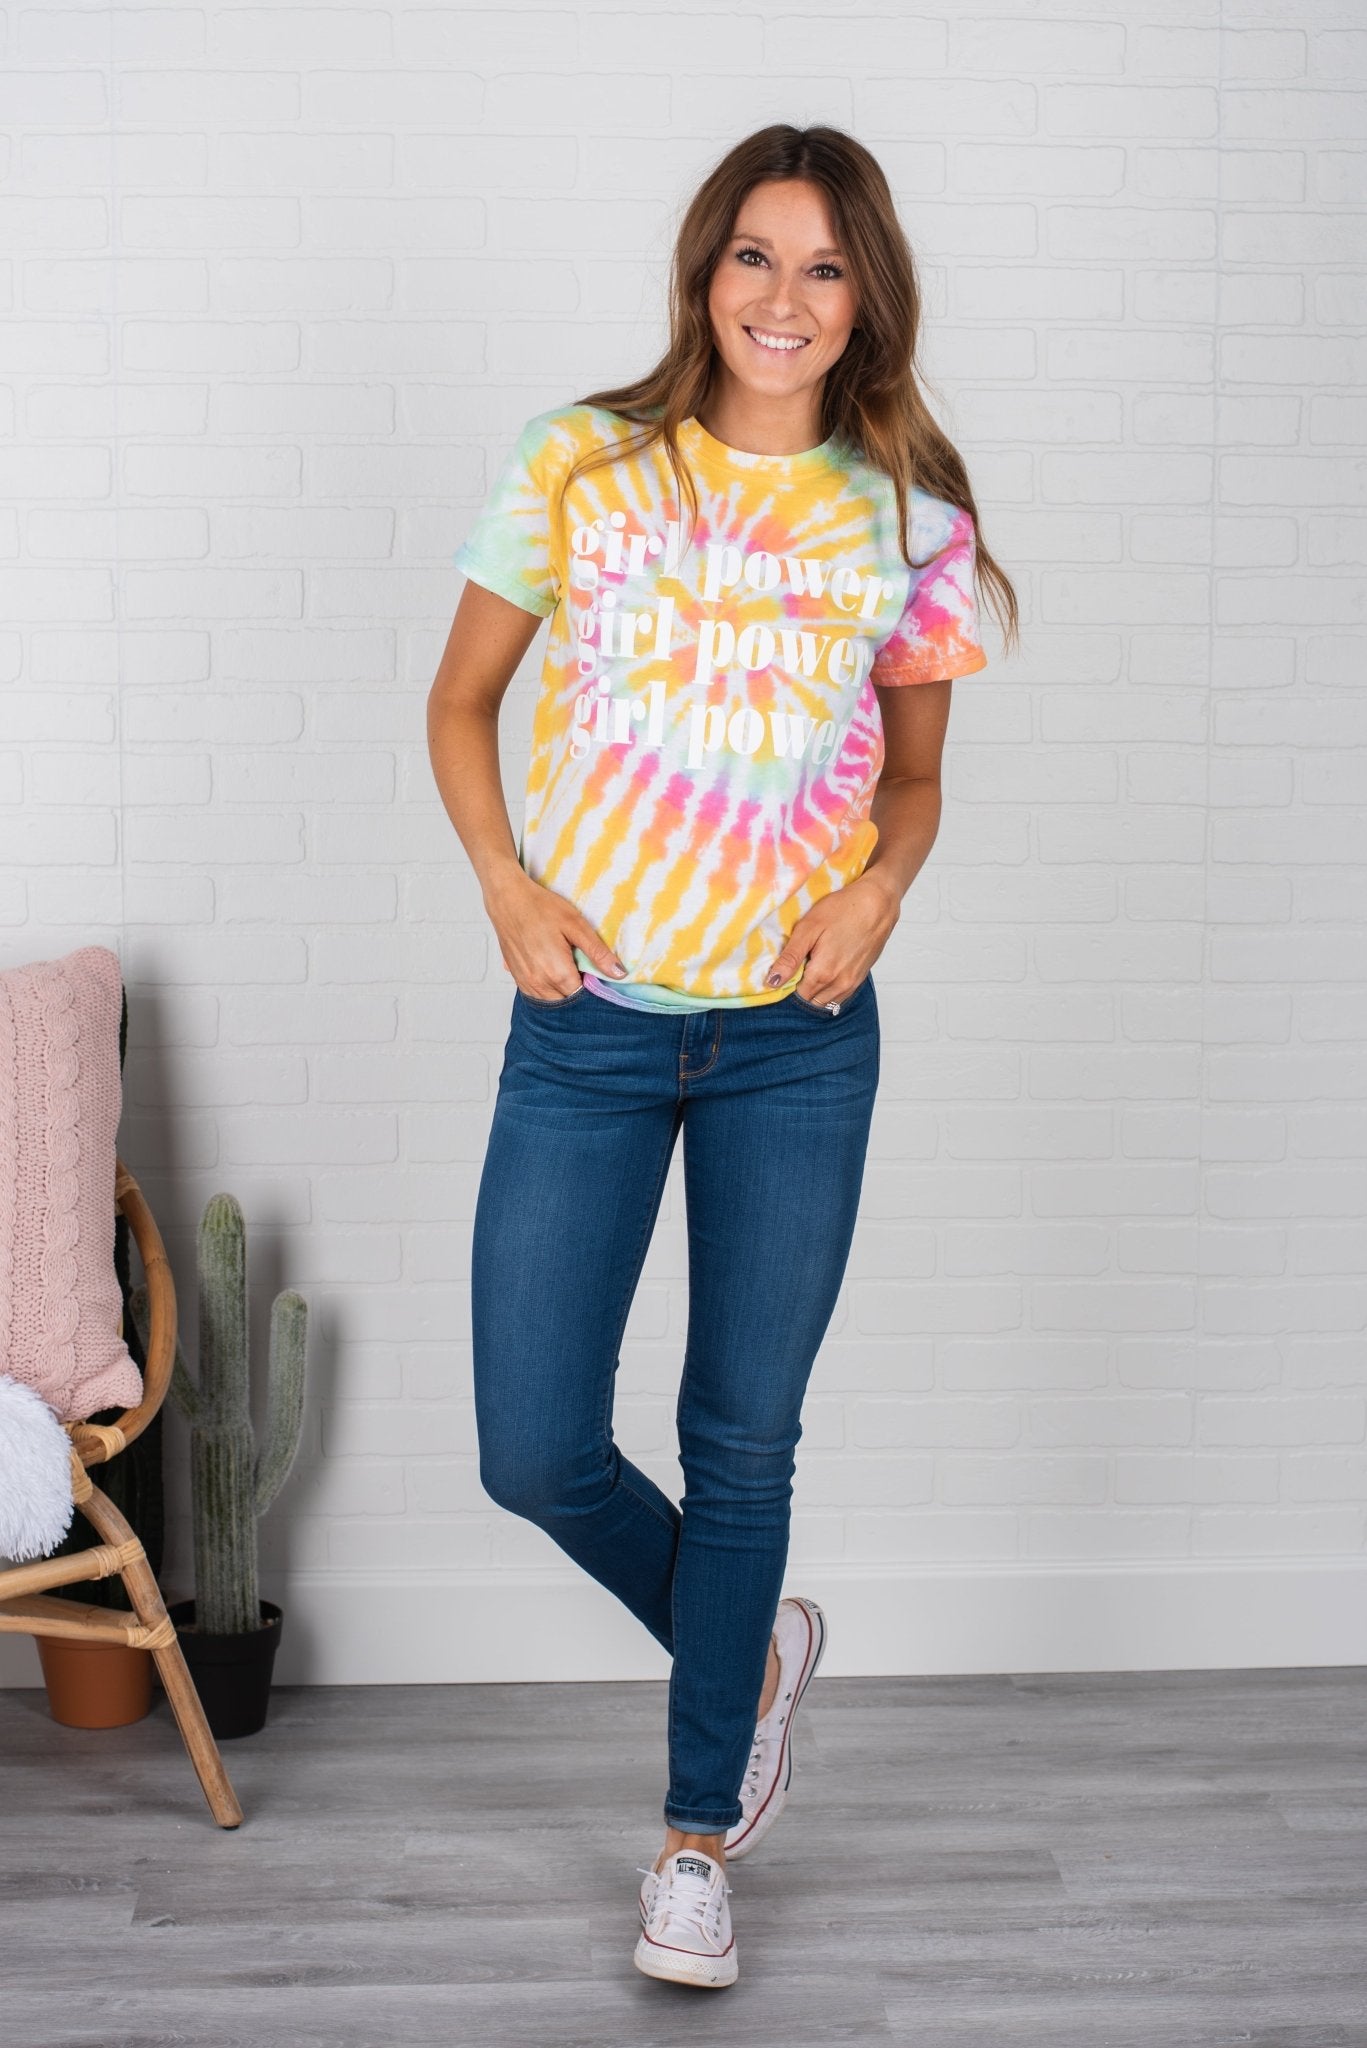 Girl power repeater tie dye unisex short sleeve t-shirt - Tie Dye T-shirts - Tie Dye Loungewear at Lush Fashion Lounge Trendy Boutique in Oklahoma City